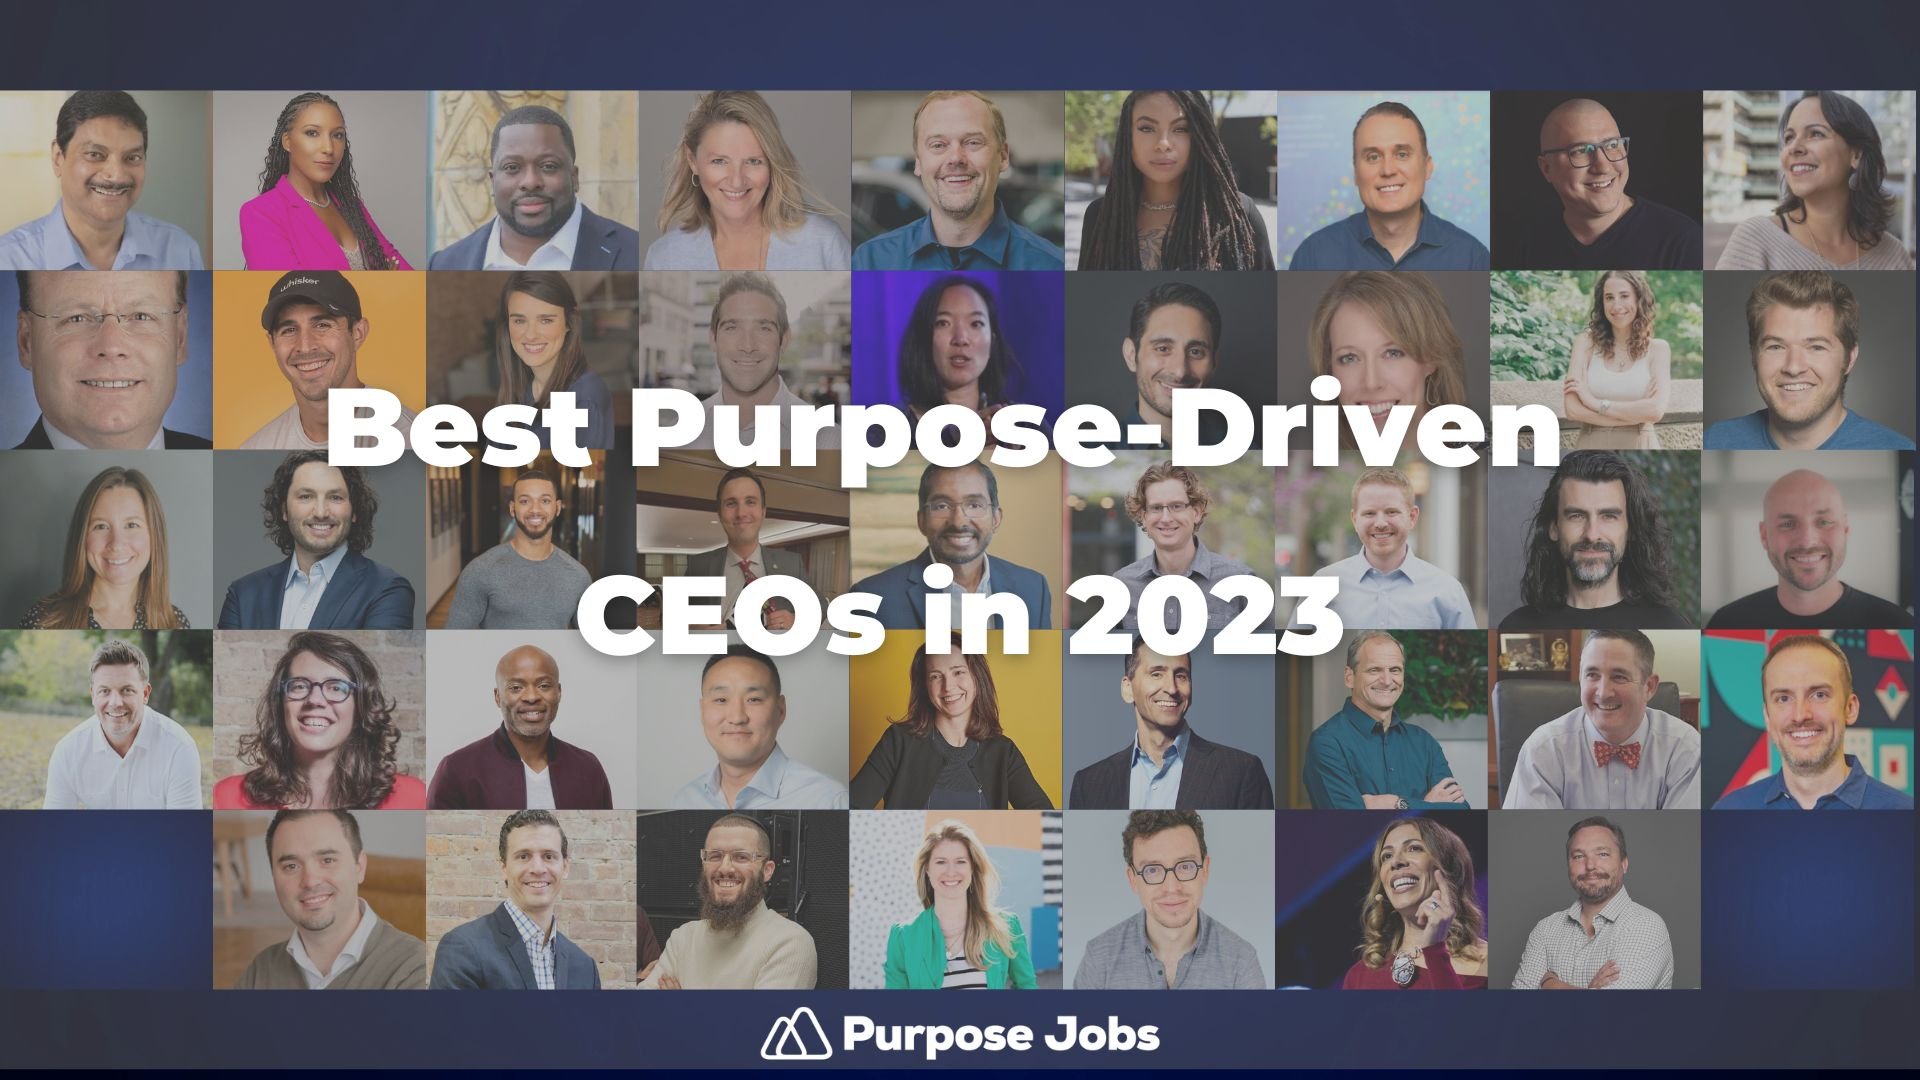 The Best Purpose-Driven CEOs in 2023